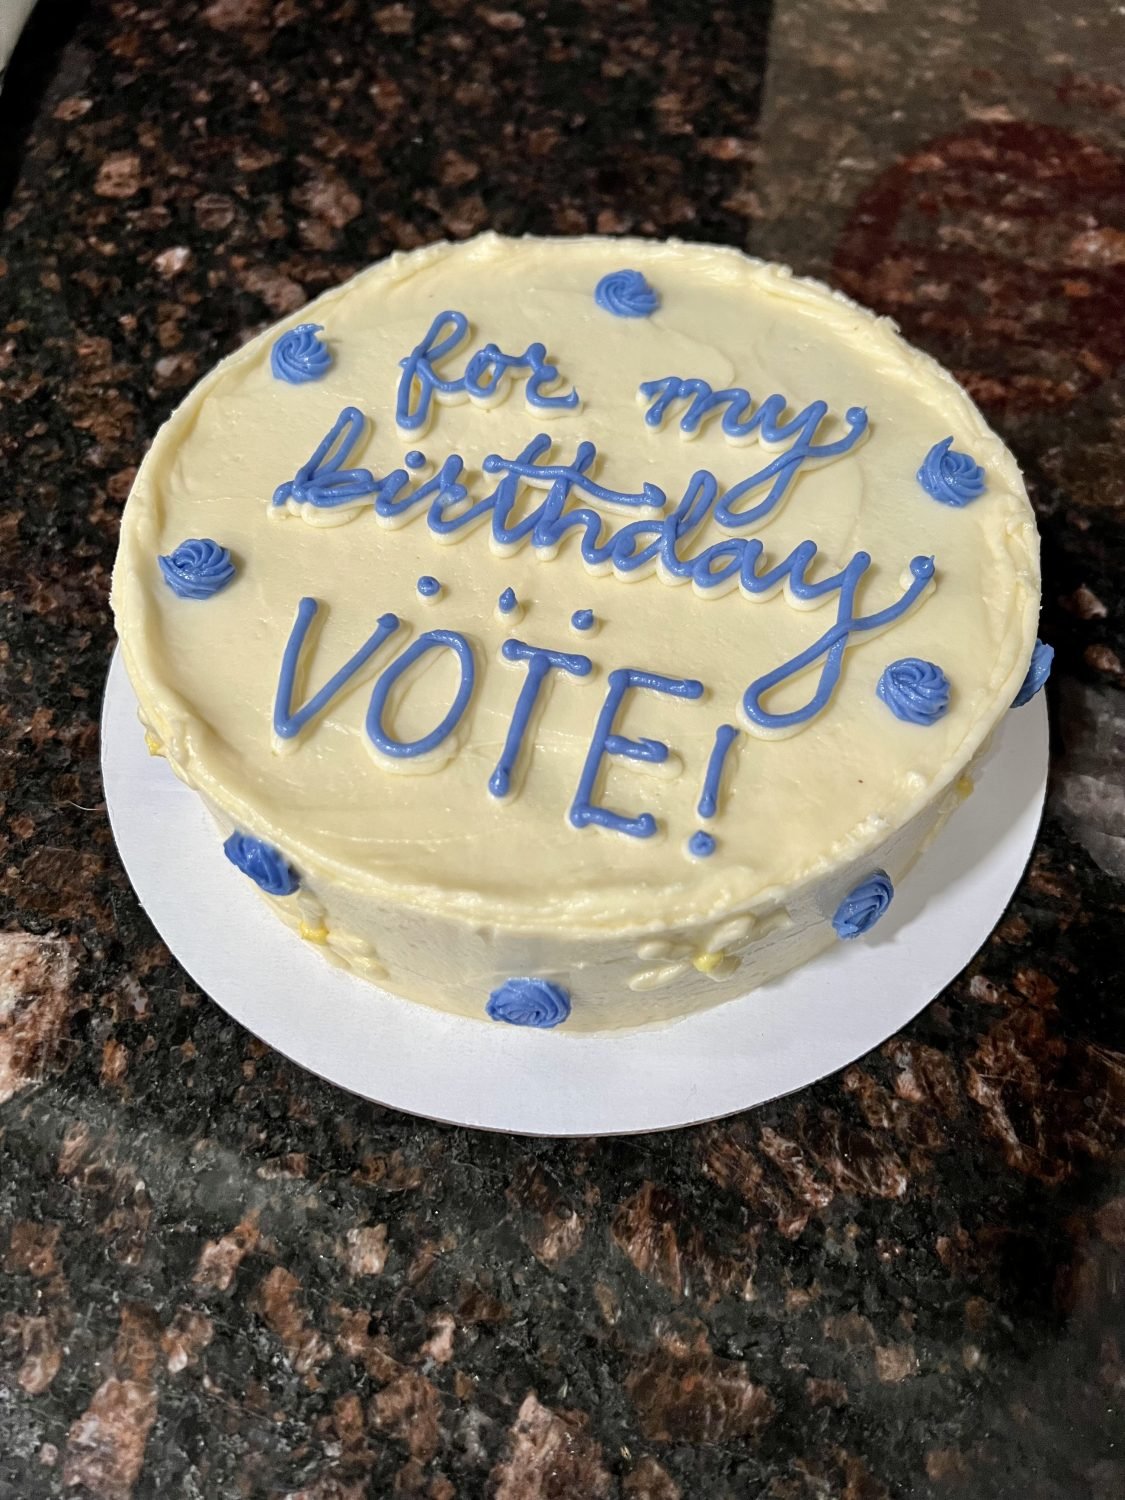 Round cake on a kitchen counter. The cake is white frosting with blue flowers and blue font saying “for my birthday VOTE!”